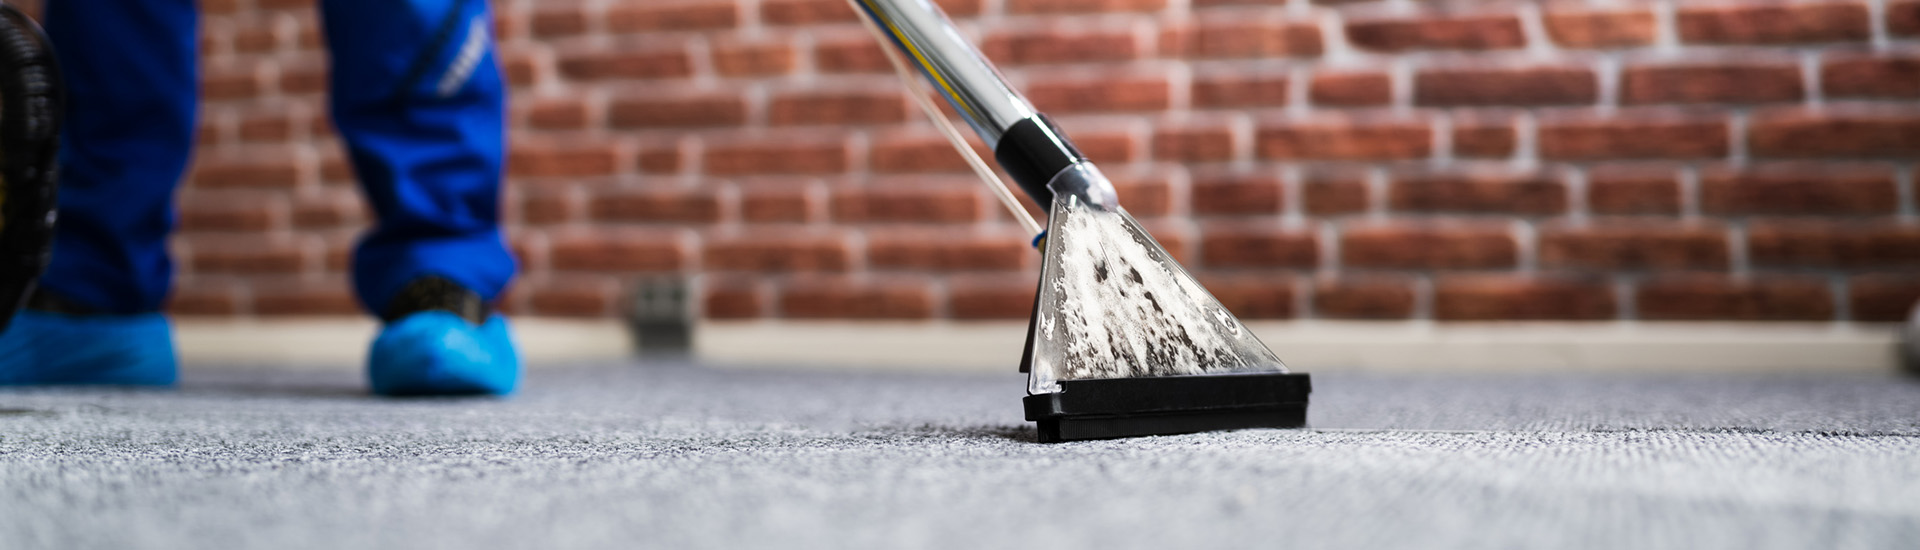 7 reasons to steam clean your carpets